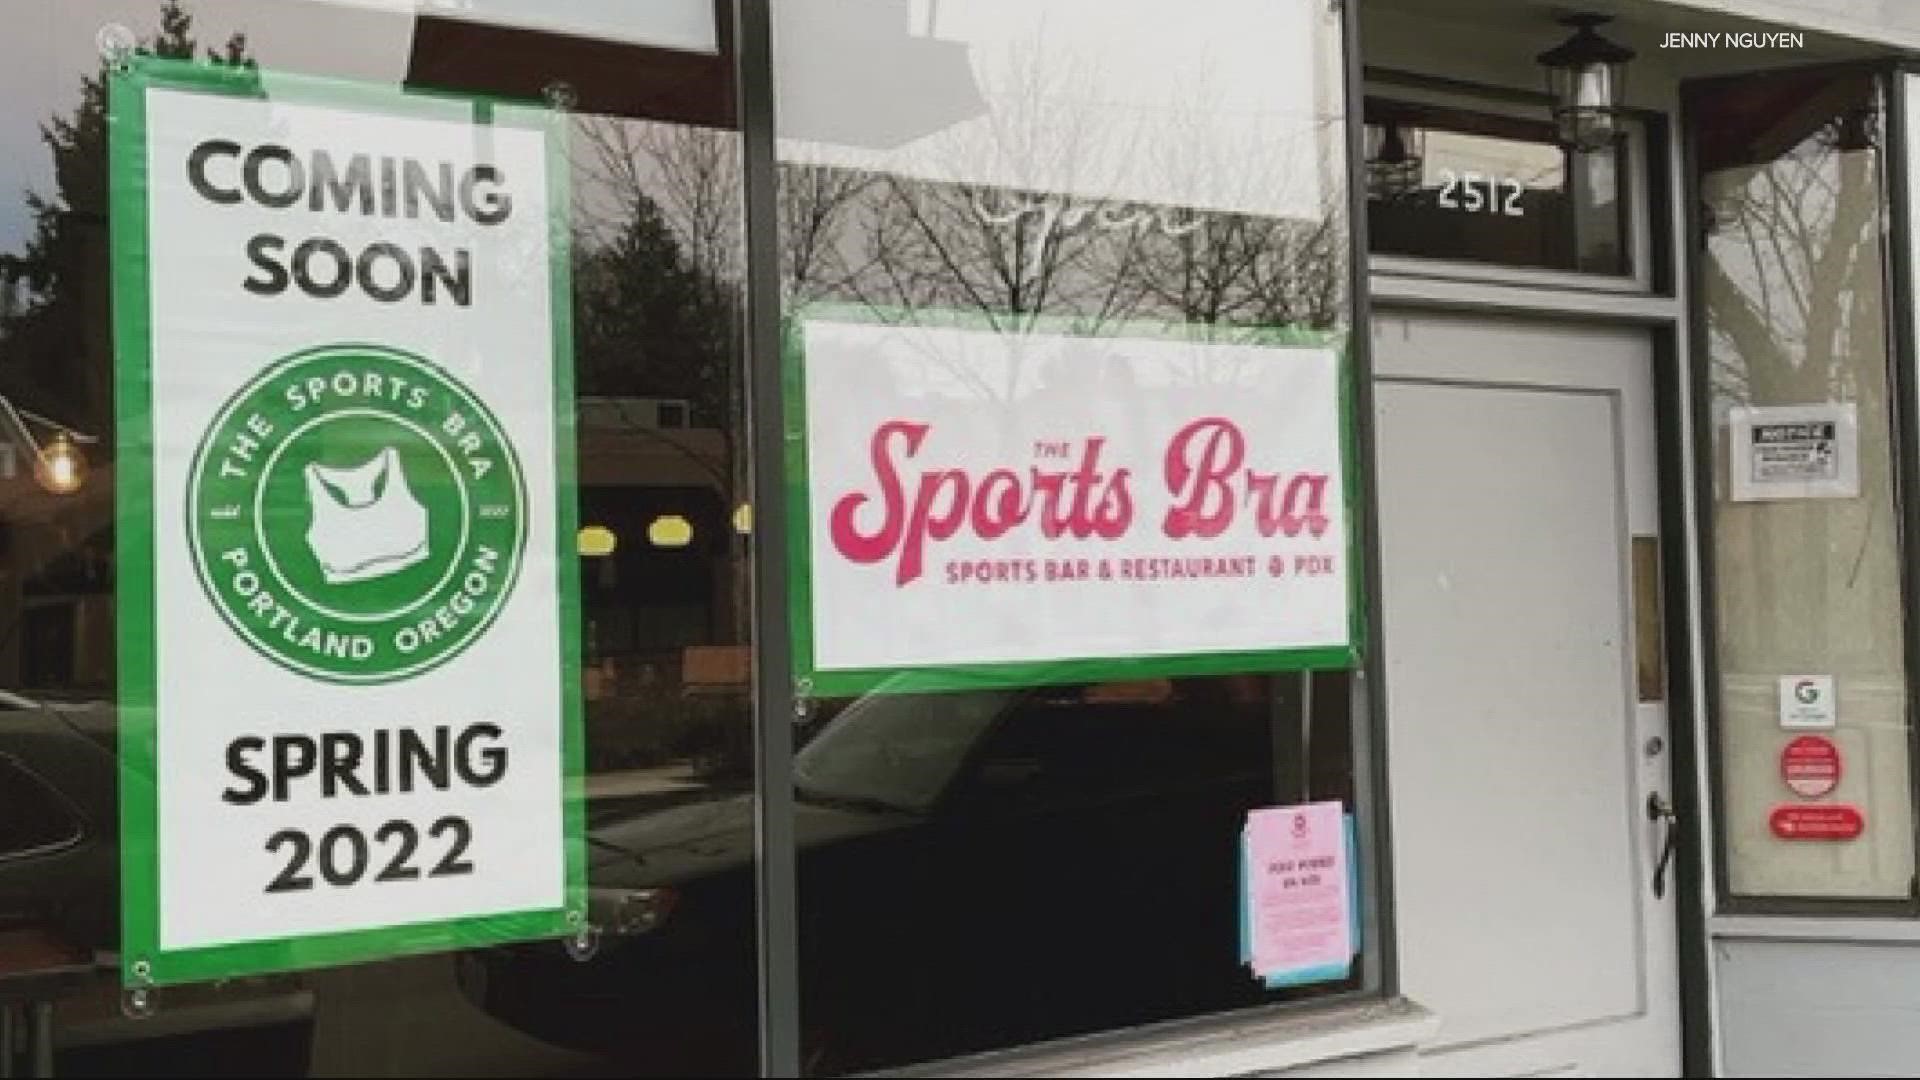 Jenny Nguyen says her new bar will focus on women’s sports and feature food and beer from woman-owned companies. The business is called The Sports Bra.